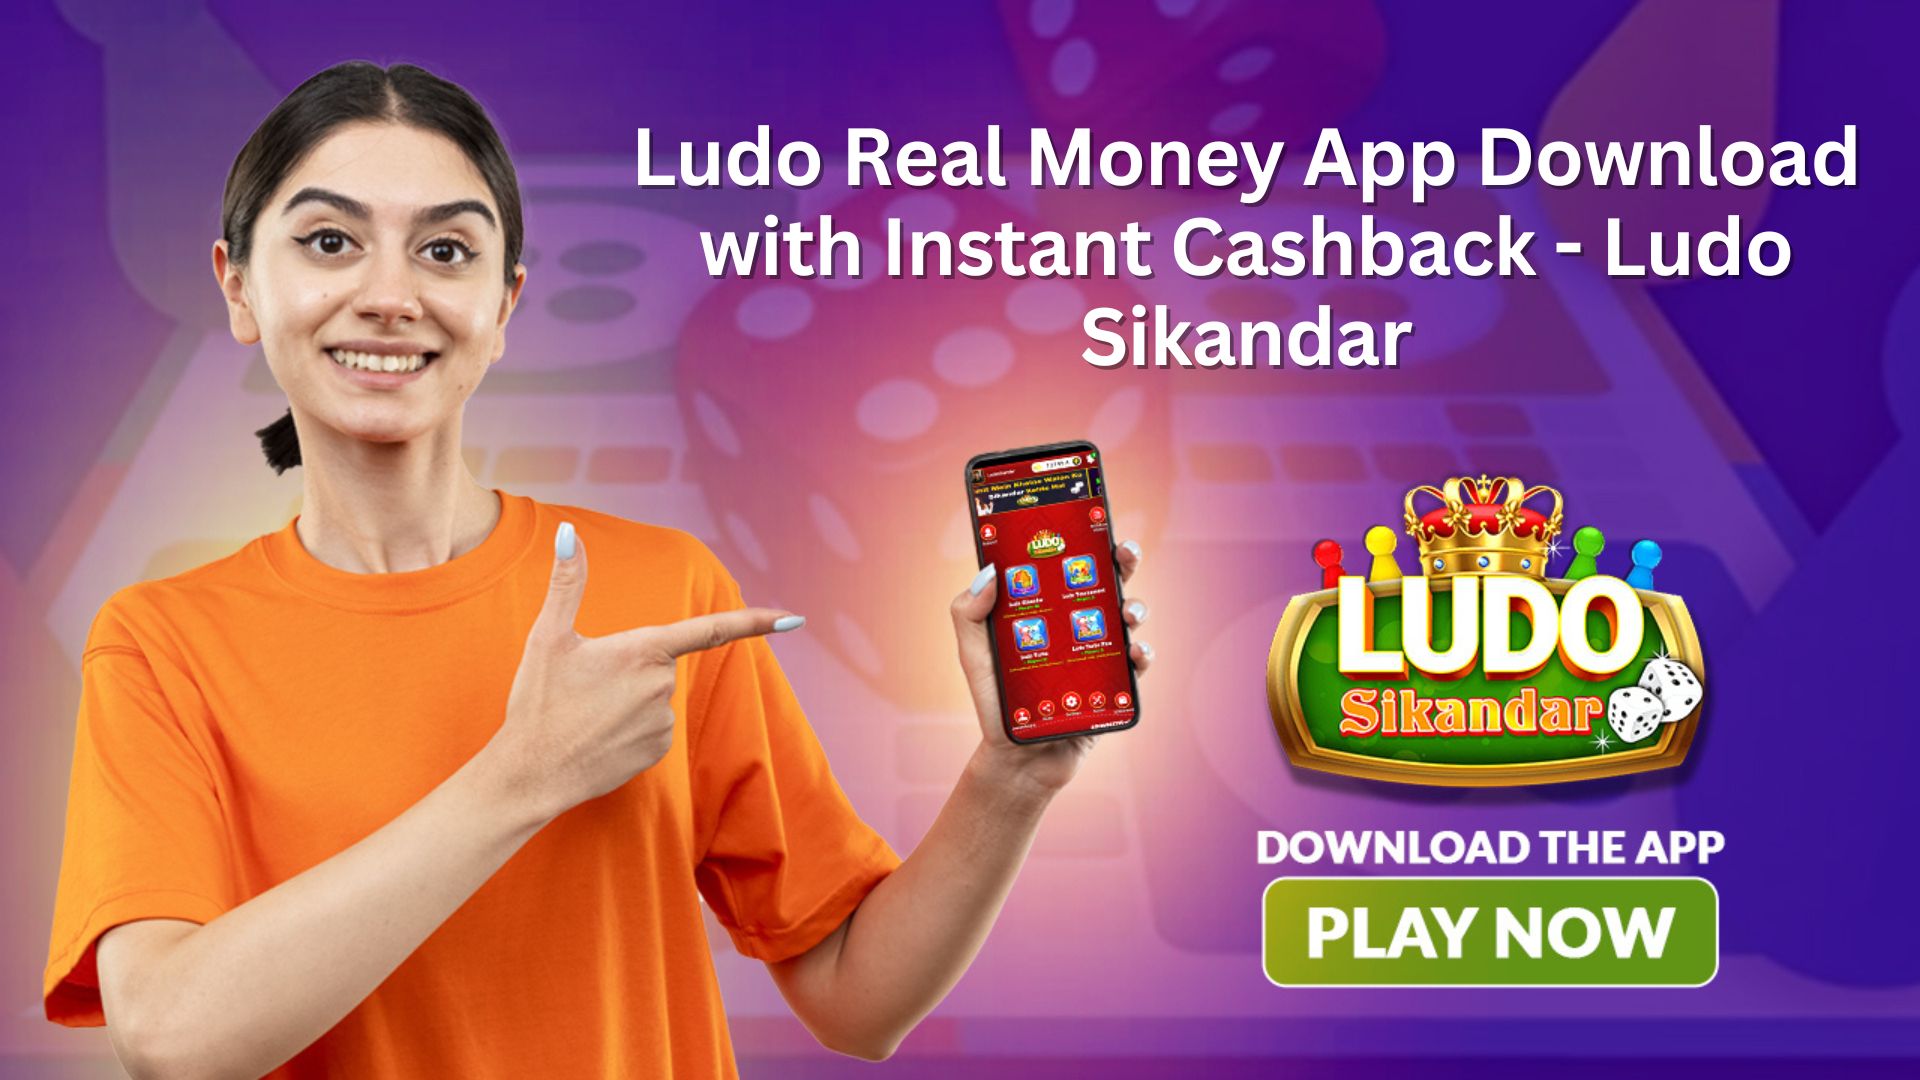 Ludo Real Money App Download with Instant Cashback – Ludo Sikandar